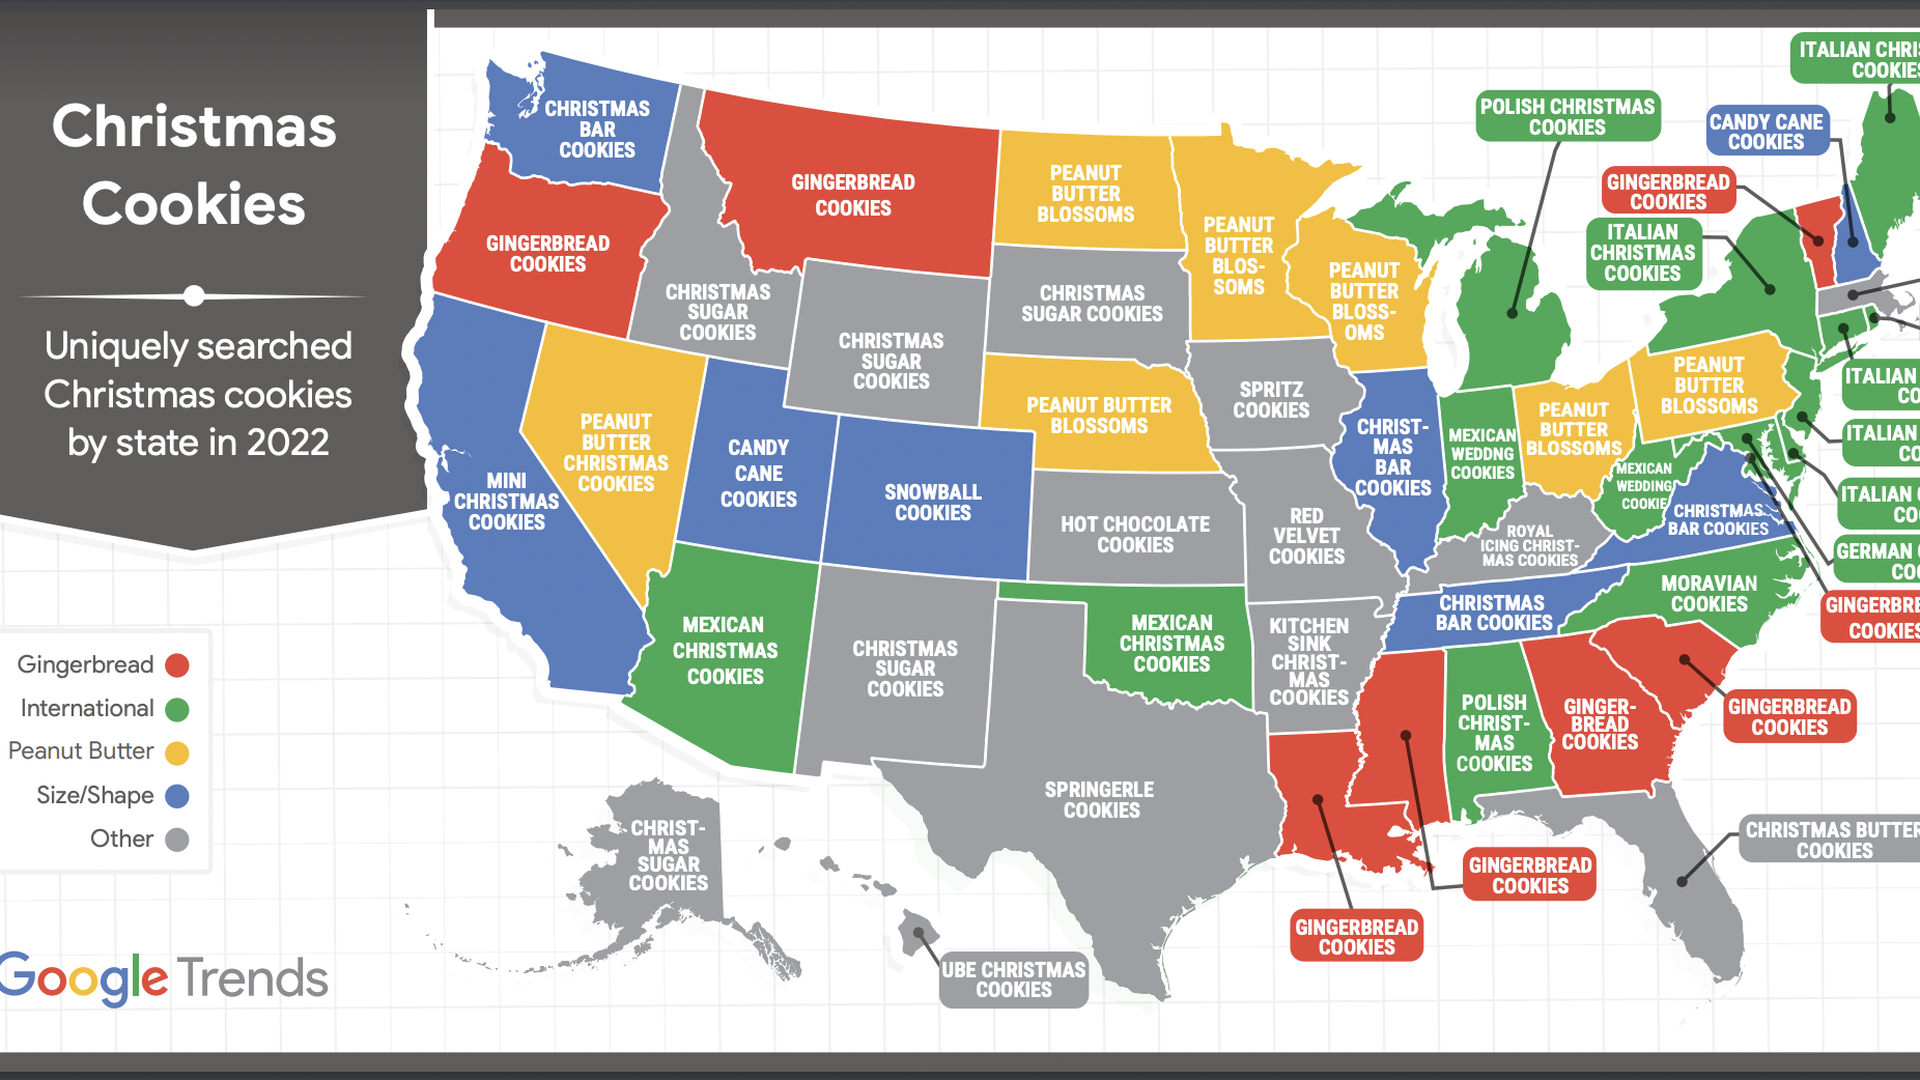 Map of U.S. with a cookie name for each state. The map from Google Trends is for most searched Christmas cookies by state.